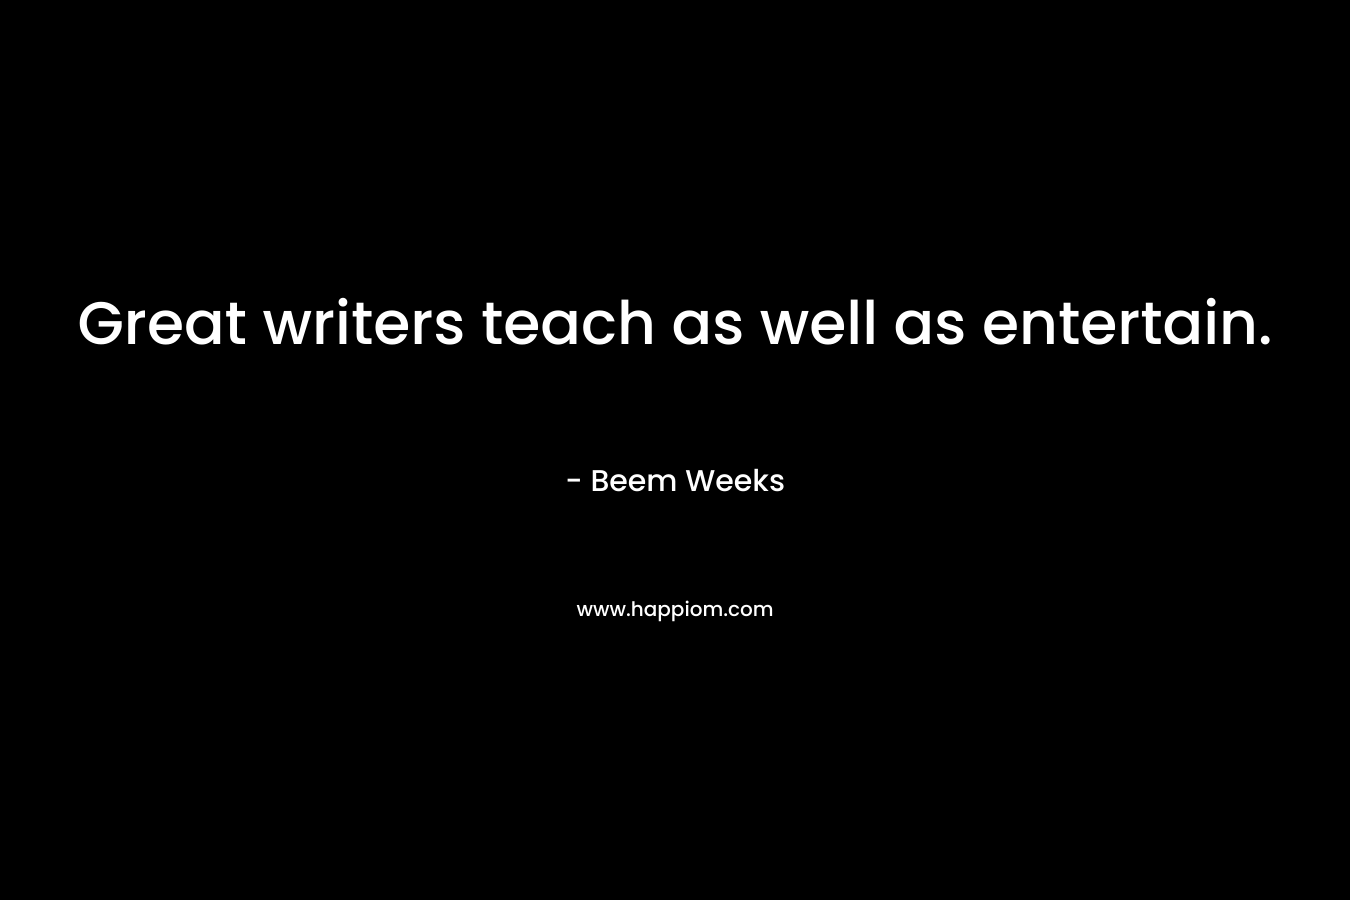 Great writers teach as well as entertain.